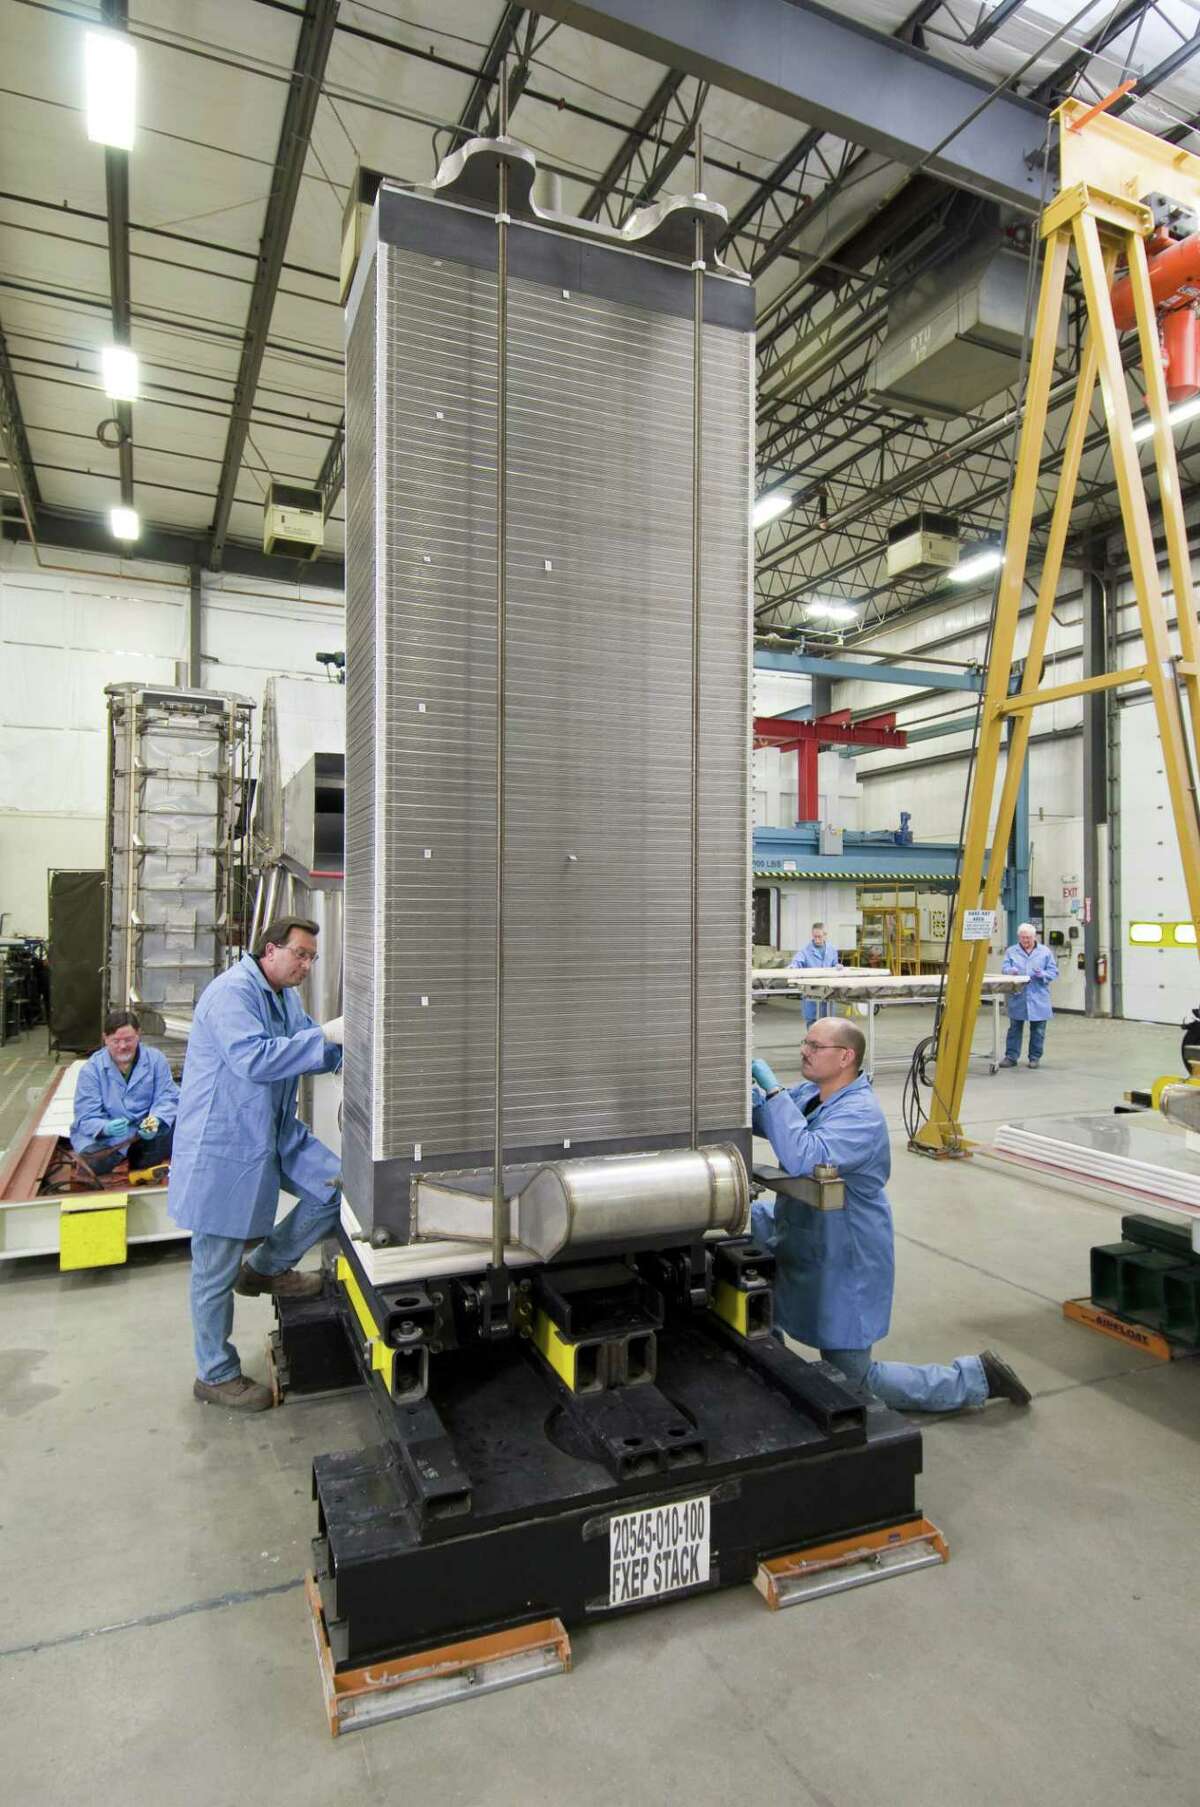 A file photo of a fuel cell membrane stack produced by Danbury, Conn.-based FuelCell Energy. (Press photo via FuelCell Energy)